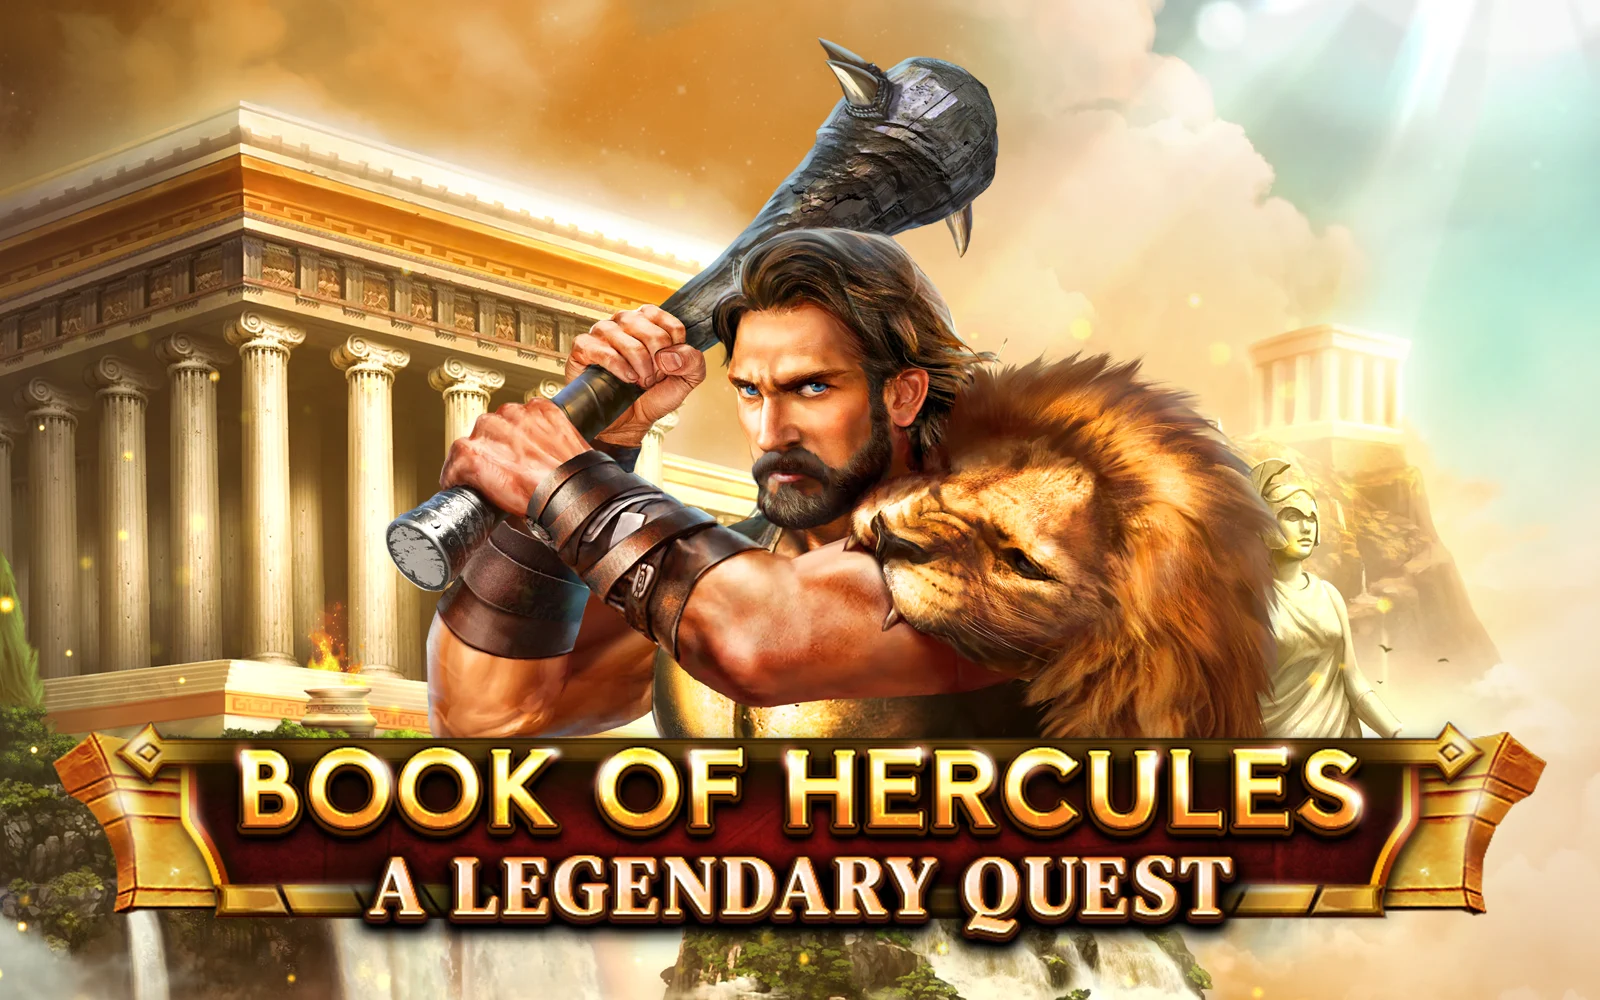 Play Book Of Hercules - A Legendary Quest on Starcasino.be online casino